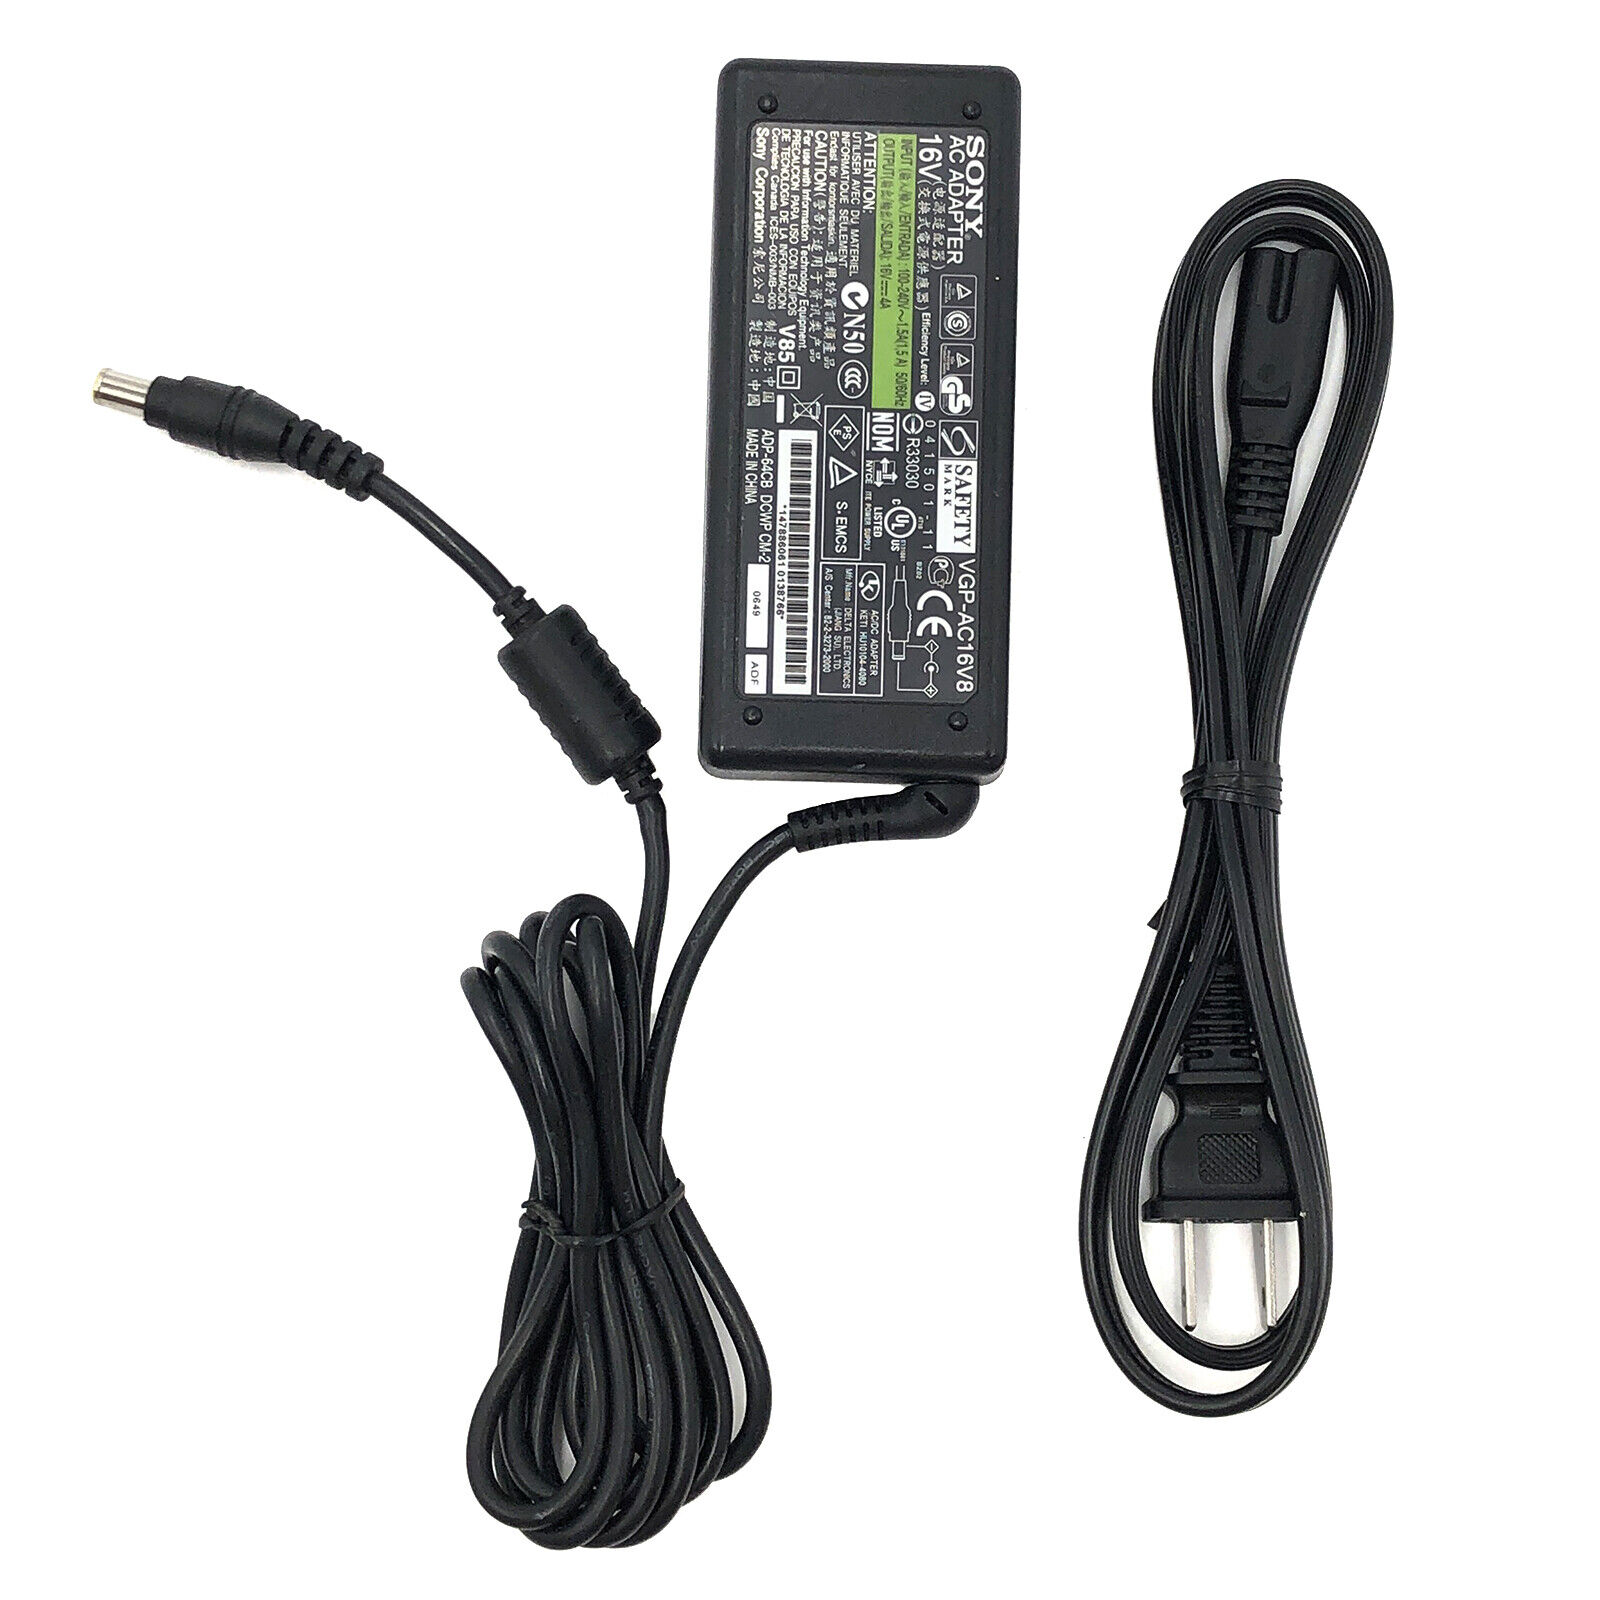 Genuine Sony VGP-AC16V8 AC Adapter 16V 4A 65W Charger for Sony VAIO